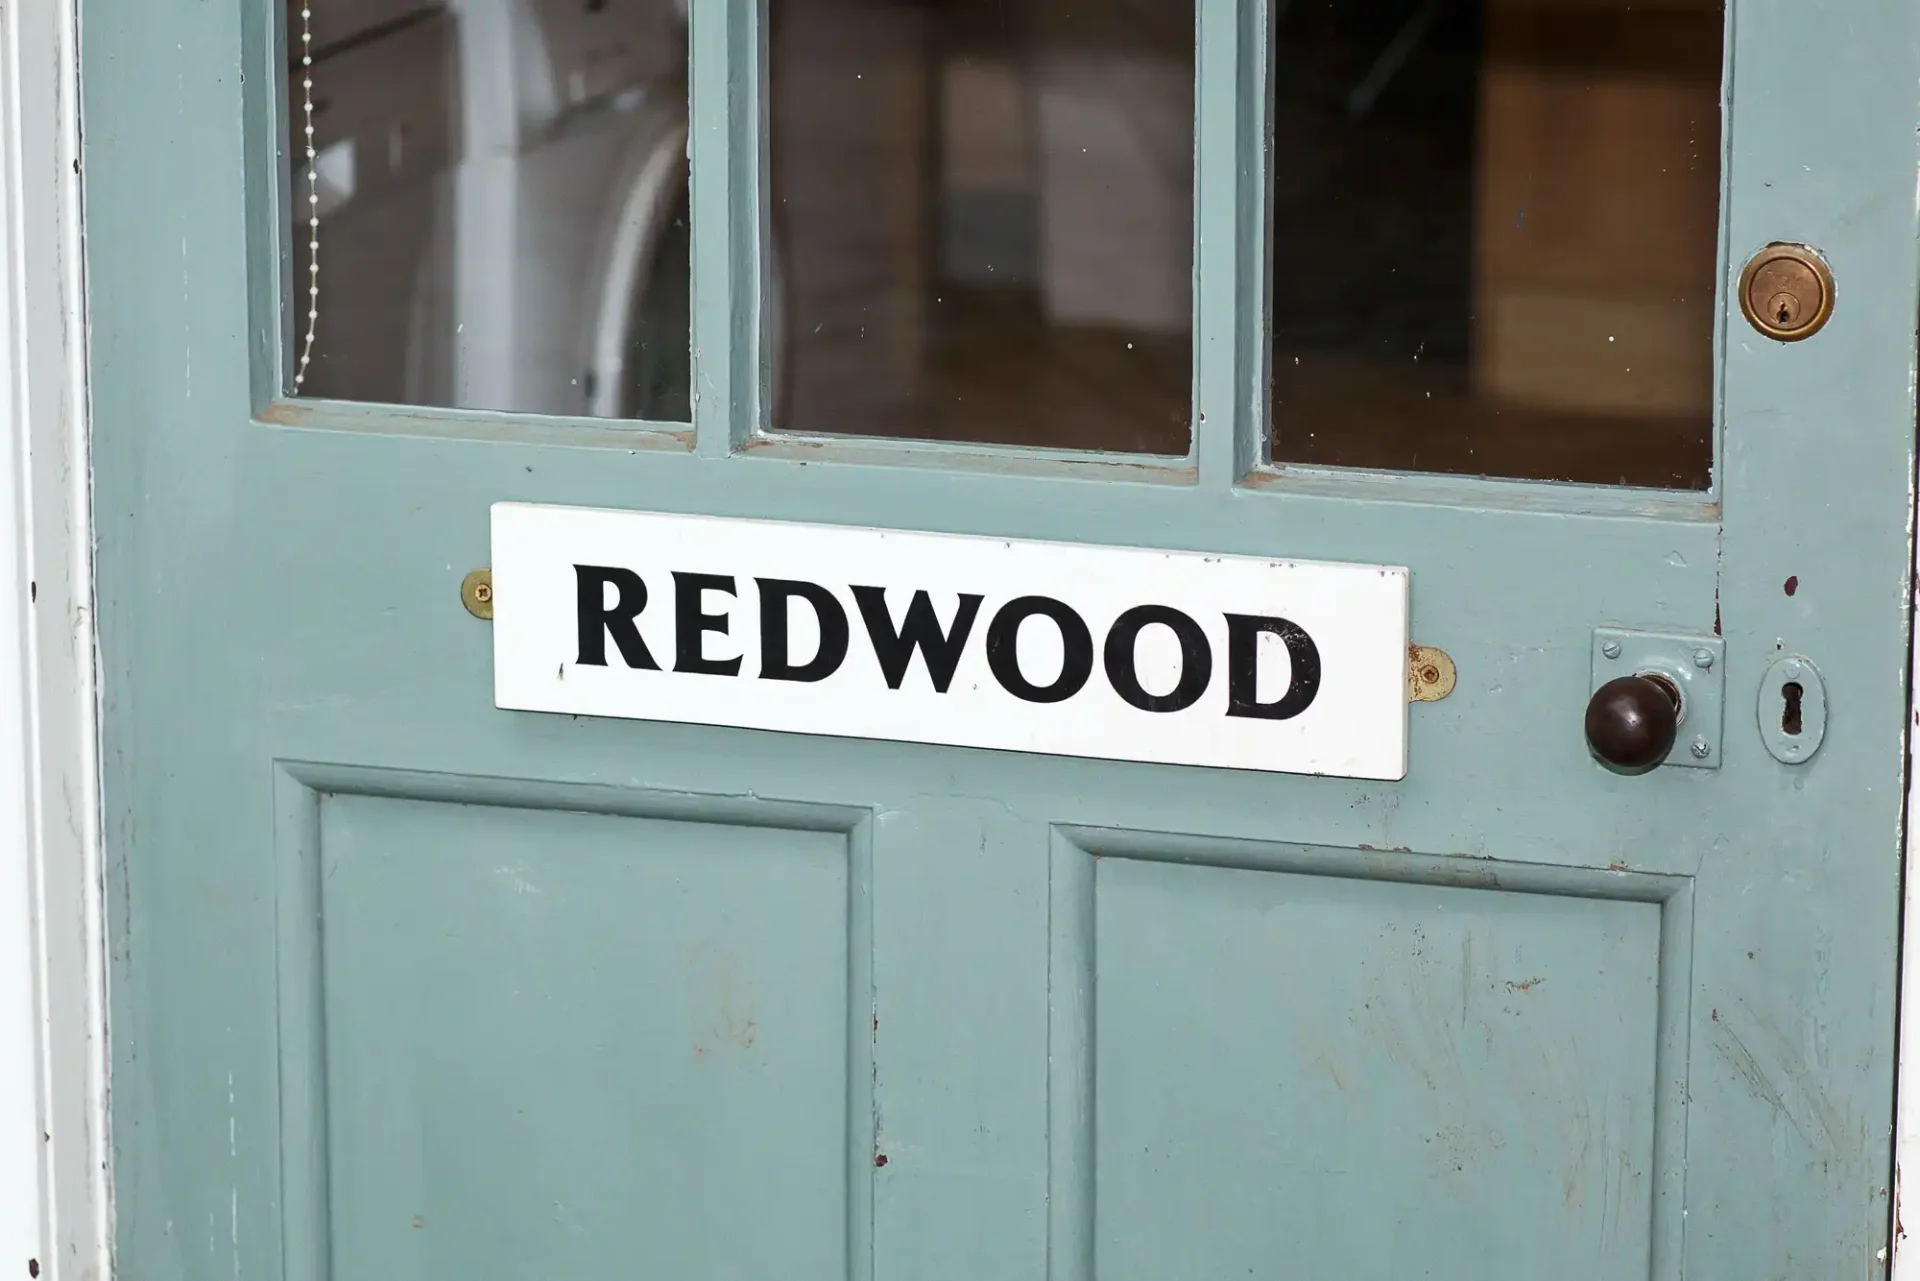 Close-up view of a worn teal door with a white sign that reads "redwood" affixed to its glass window.